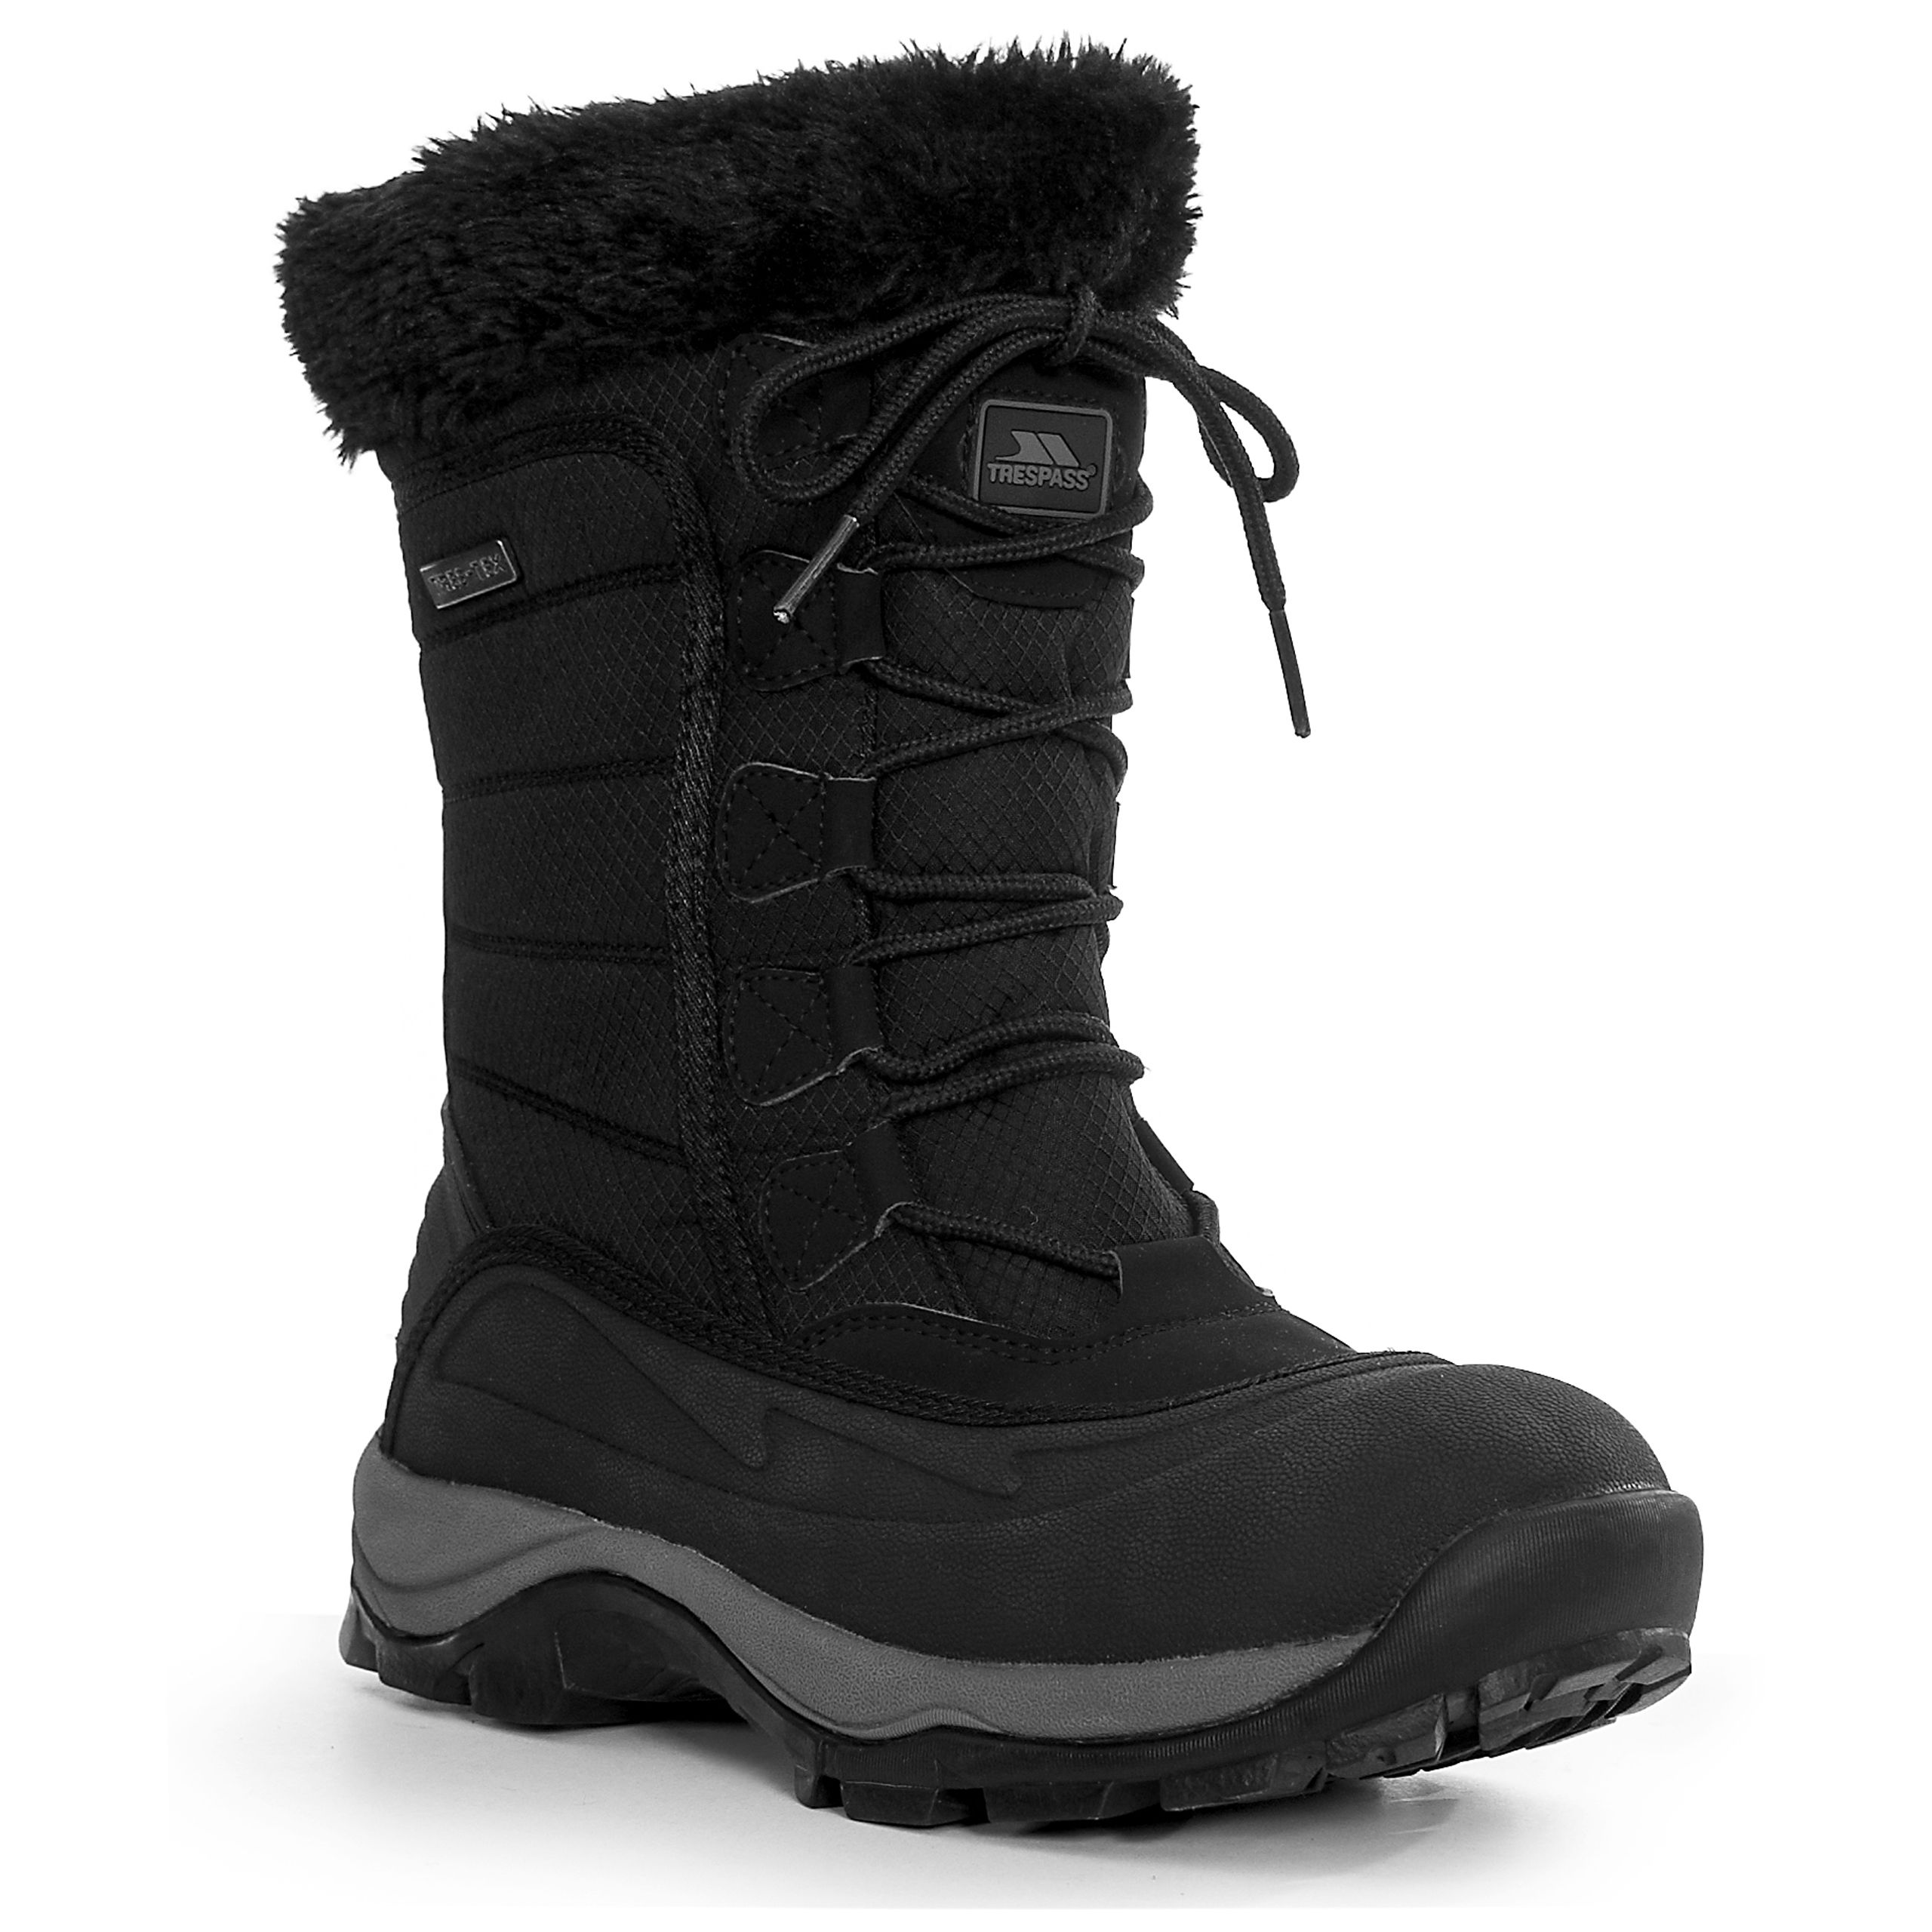 Stalagmite Womens Lace Up Snow Boots